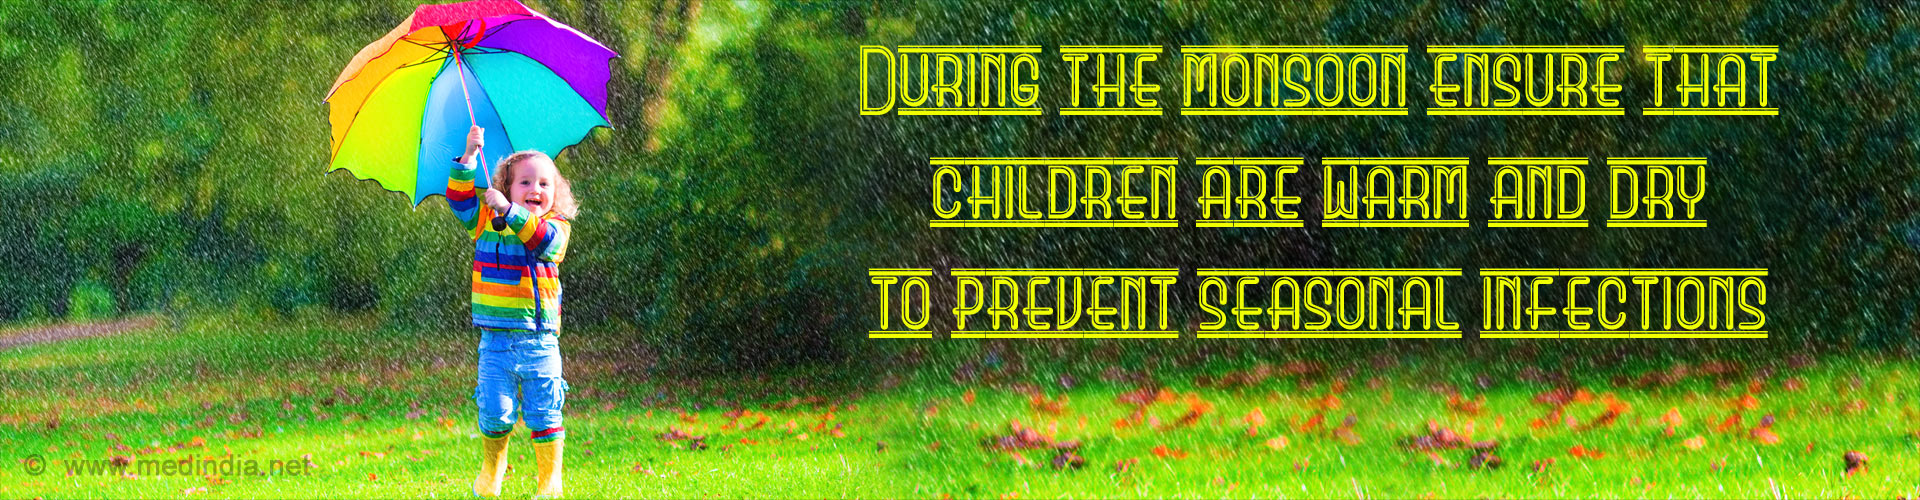 During the monsoon ensure that children are warm and dry to prevent seasonal infections